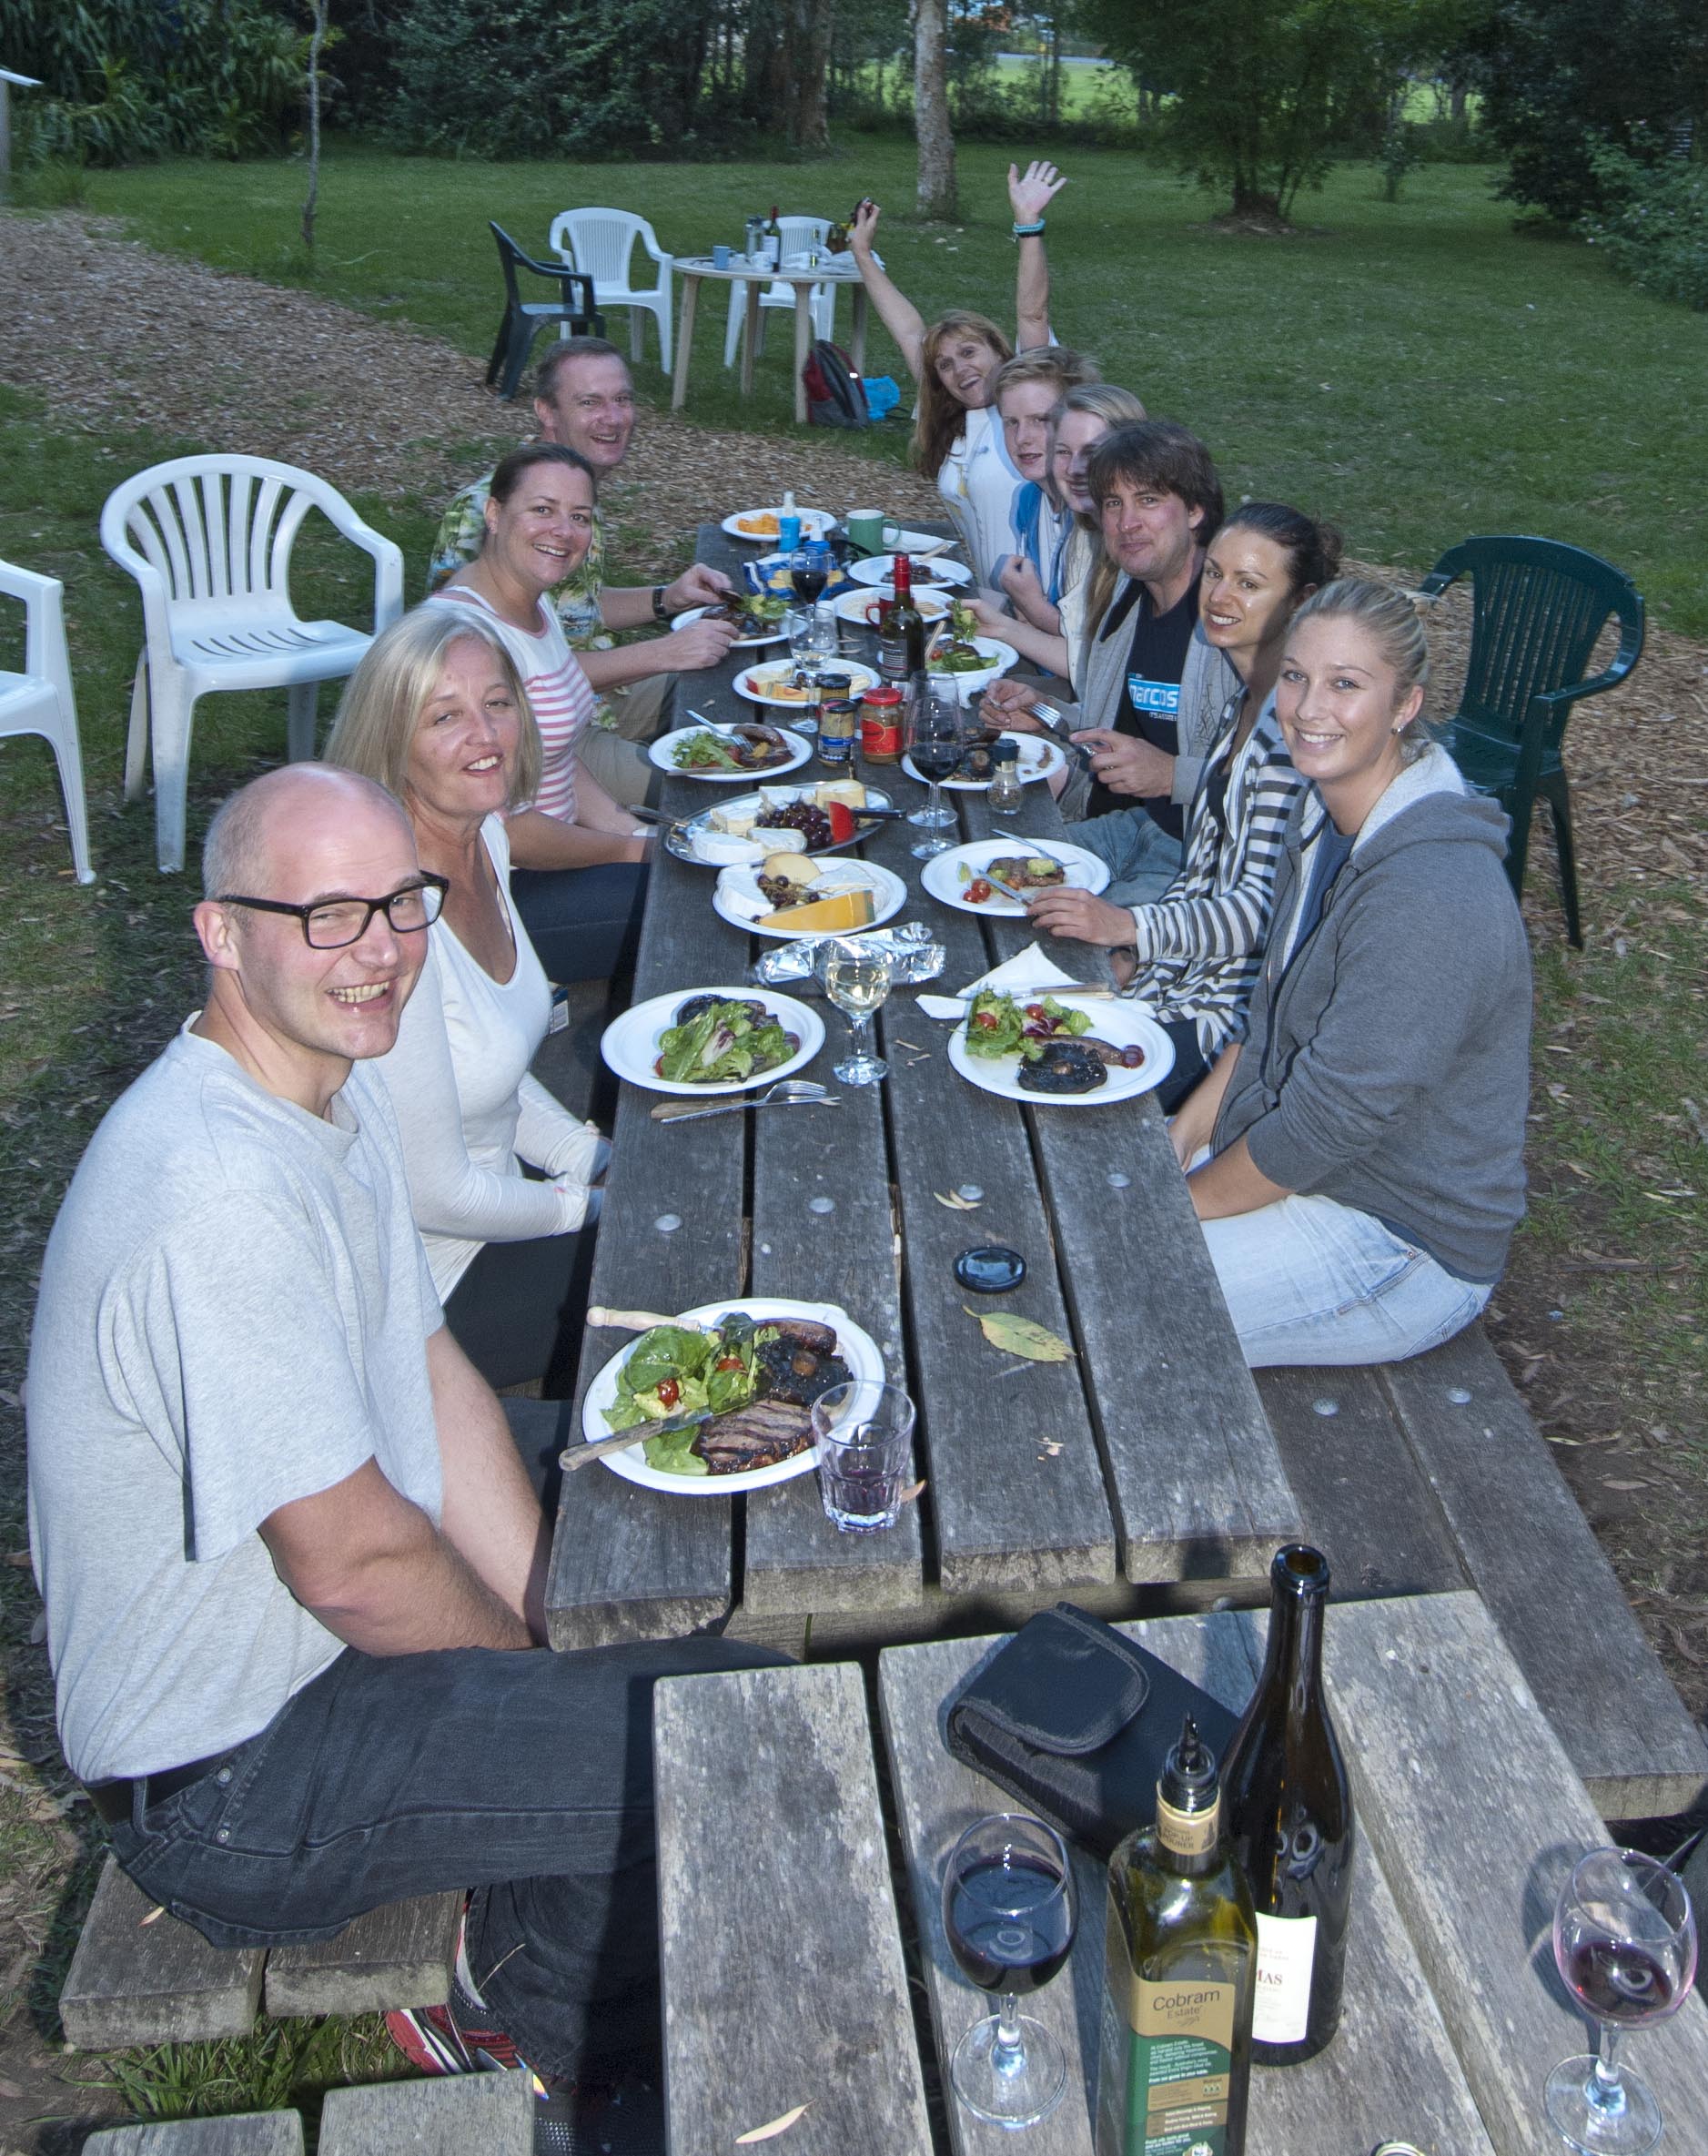 Our photo workshop participants enjoy an evening of wine, food and fun.